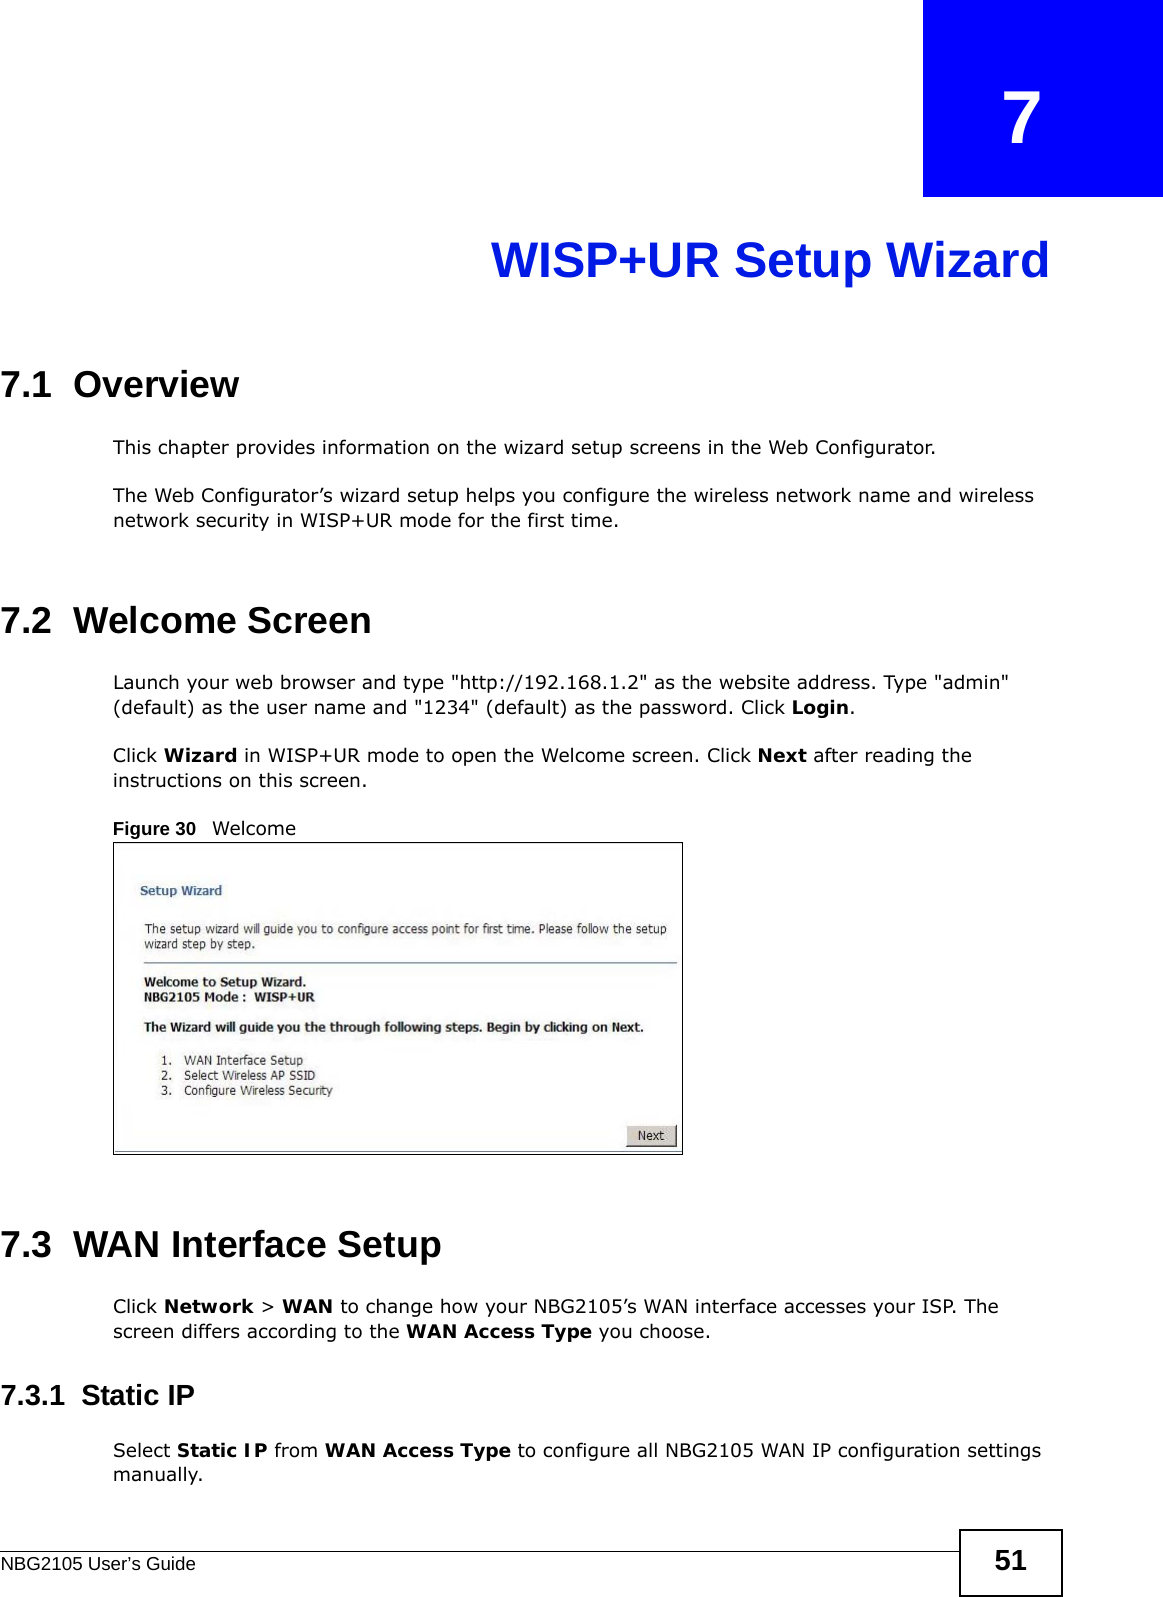 NBG2105 User’s Guide 51CHAPTER   7WISP+UR Setup Wizard7.1  OverviewThis chapter provides information on the wizard setup screens in the Web Configurator.The Web Configurator’s wizard setup helps you configure the wireless network name and wireless network security in WISP+UR mode for the first time.7.2  Welcome ScreenLaunch your web browser and type &quot;http://192.168.1.2&quot; as the website address. Type &quot;admin&quot; (default) as the user name and &quot;1234&quot; (default) as the password. Click Login.Click Wizard in WISP+UR mode to open the Welcome screen. Click Next after reading the instructions on this screen.Figure 30   Welcome 7.3  WAN Interface SetupClick Network &gt; WAN to change how your NBG2105’s WAN interface accesses your ISP. The screen differs according to the WAN Access Type you choose.7.3.1  Static IPSelect Static IP from WAN Access Type to configure all NBG2105 WAN IP configuration settings manually.